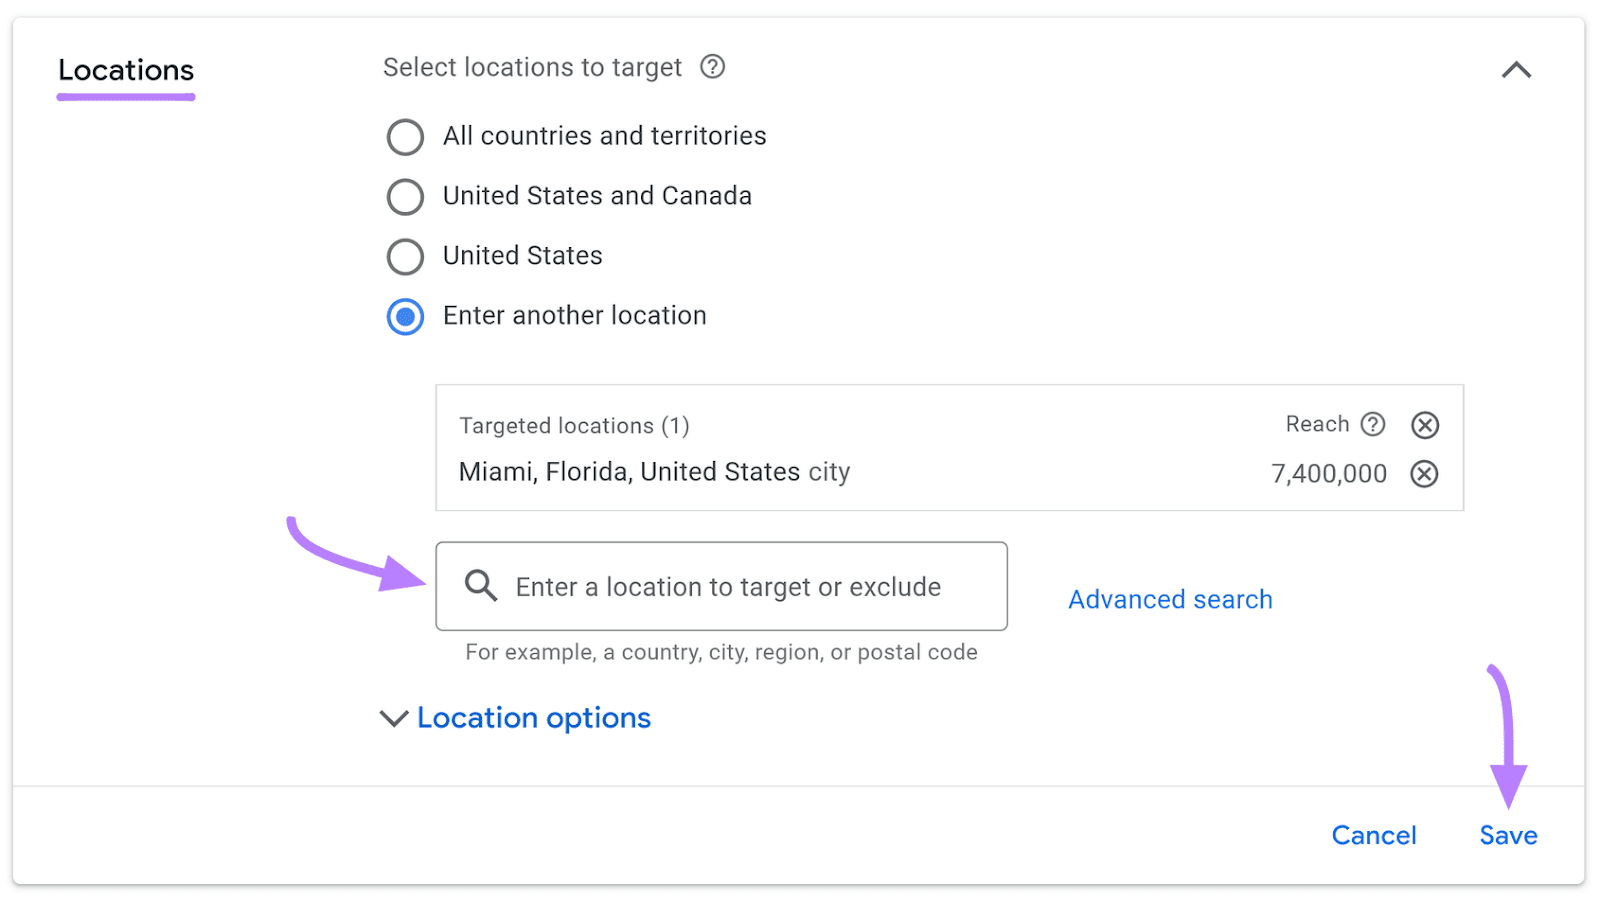 “Locations” section in Google Ads settings